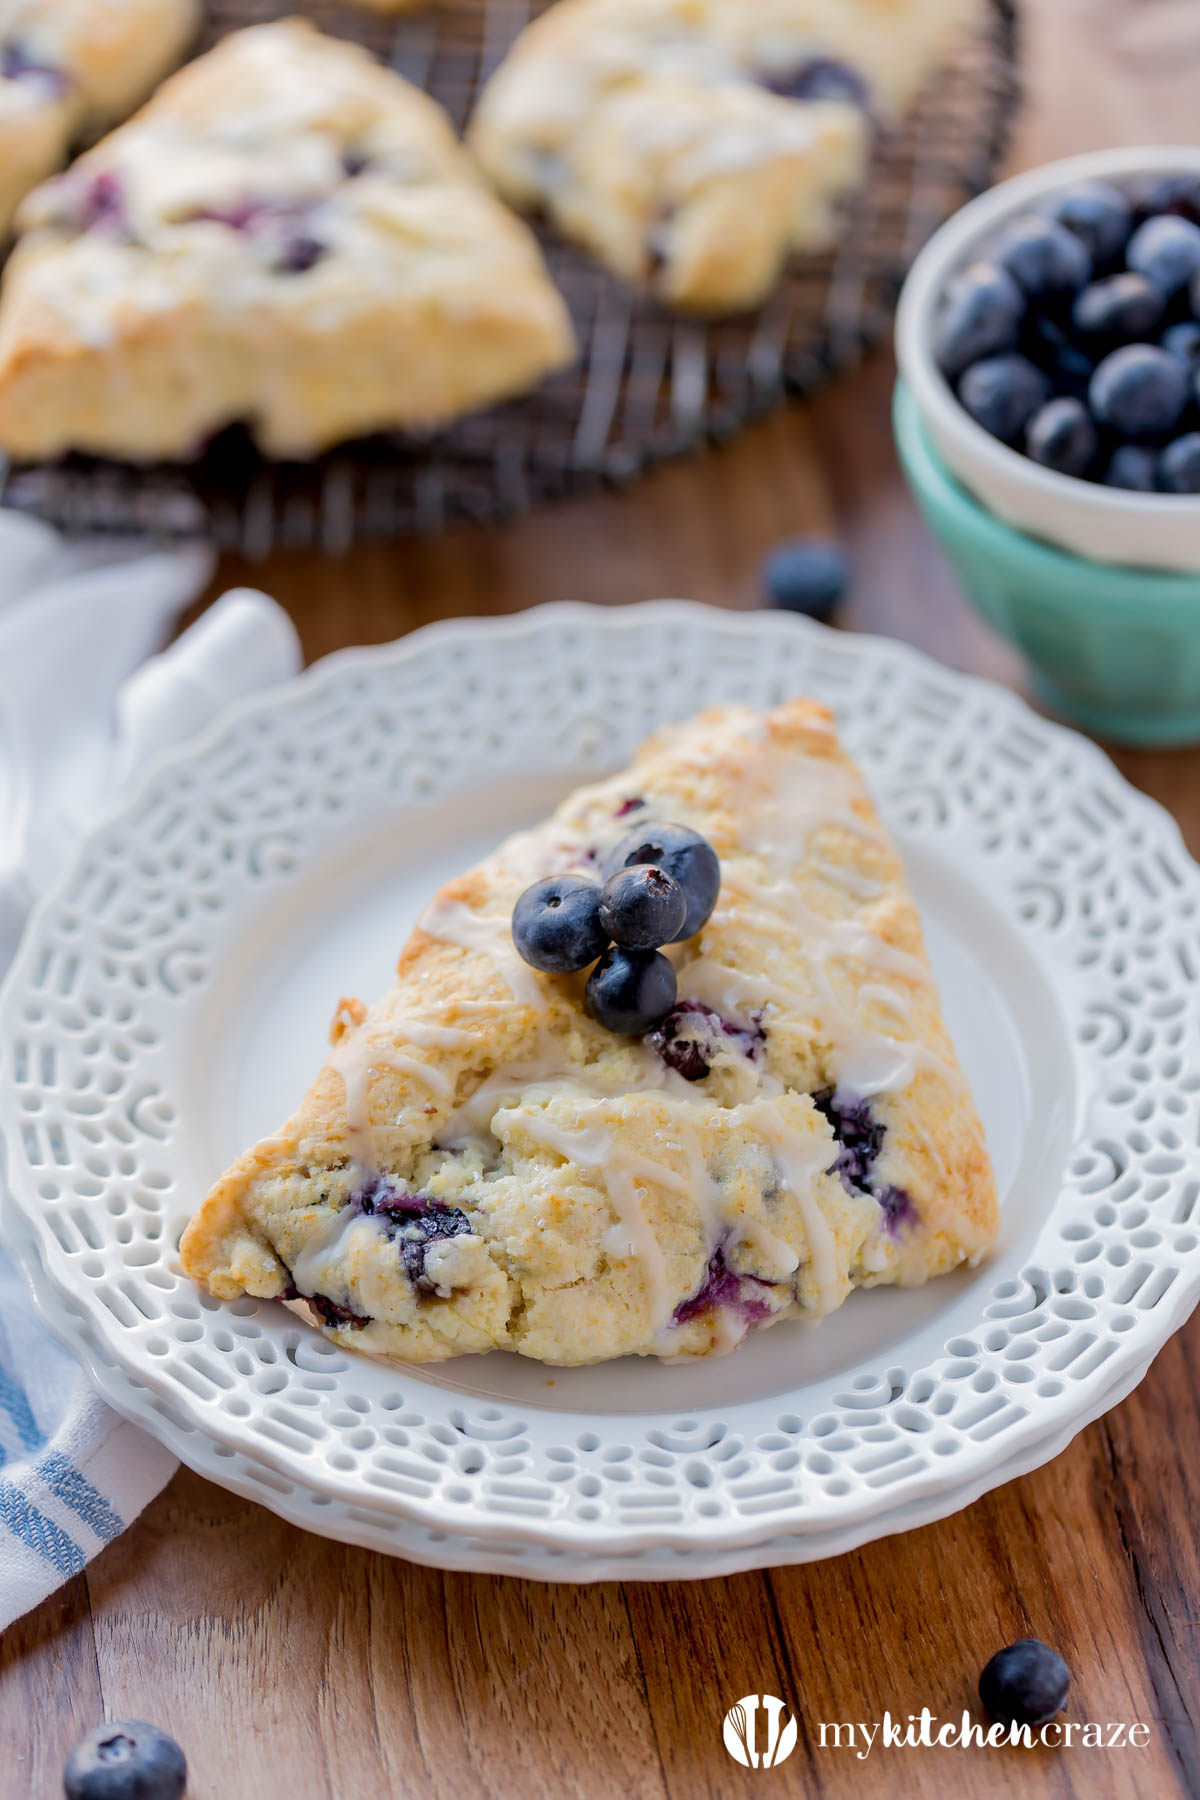 Blueberry Scones with Vanilla Glaze are perfect for a quick grab and go breakfast. They're crunchy around the edges but moist in the center. Topped with a vanilla glaze to give them a bit of sweetness.